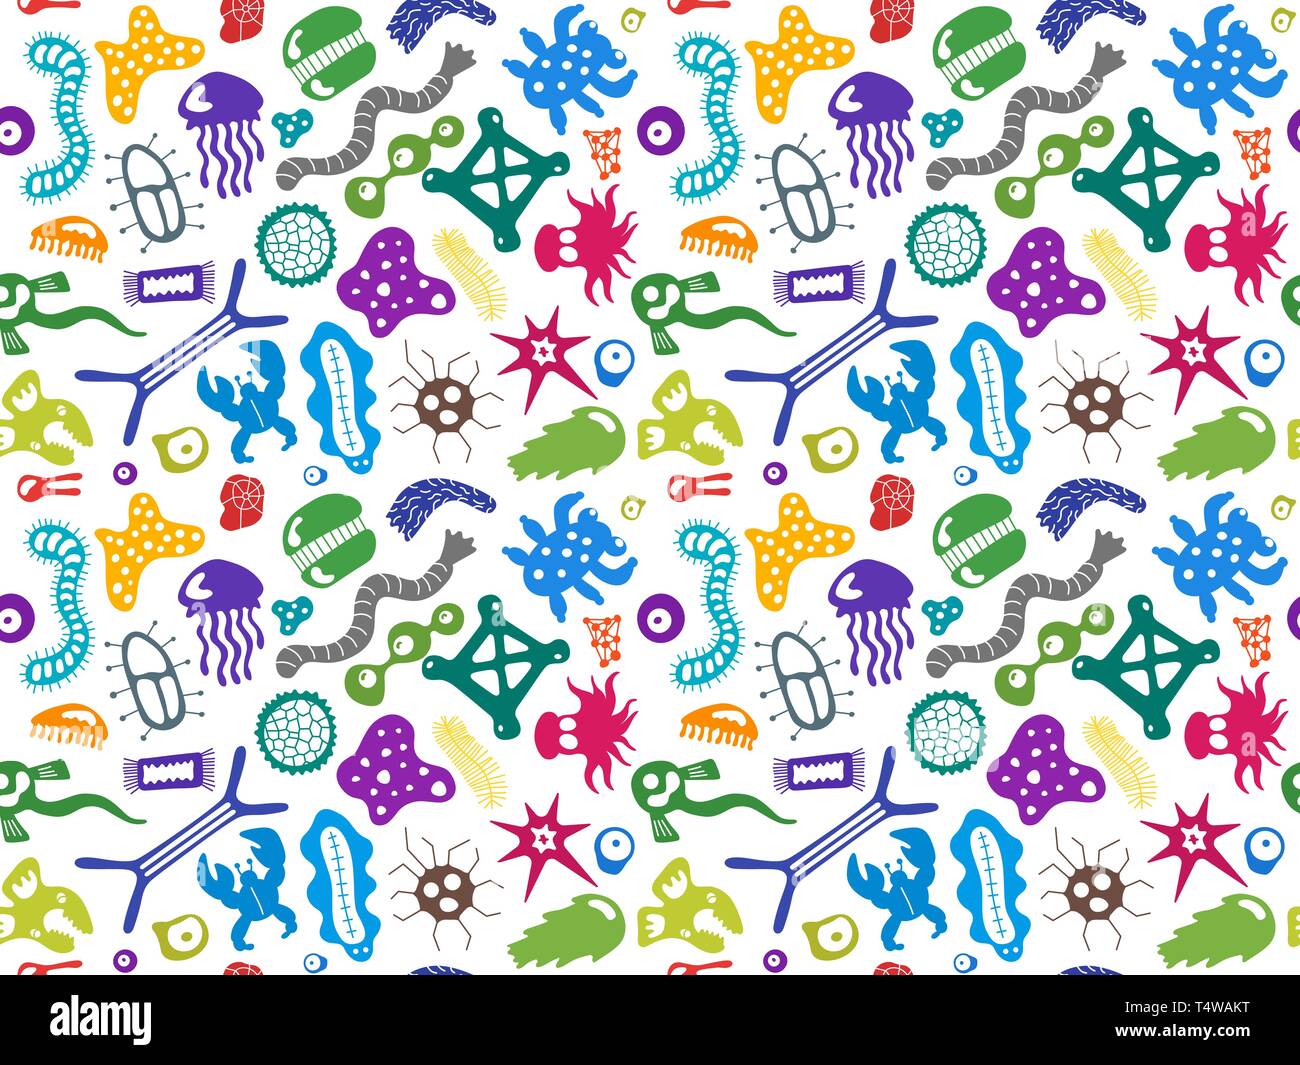 Various microorganisms seamless pattern. Backdrop with infectious germs, protists, microbes, disease causing bacteria, viruses. Biodiversity plankton. Stock Vector